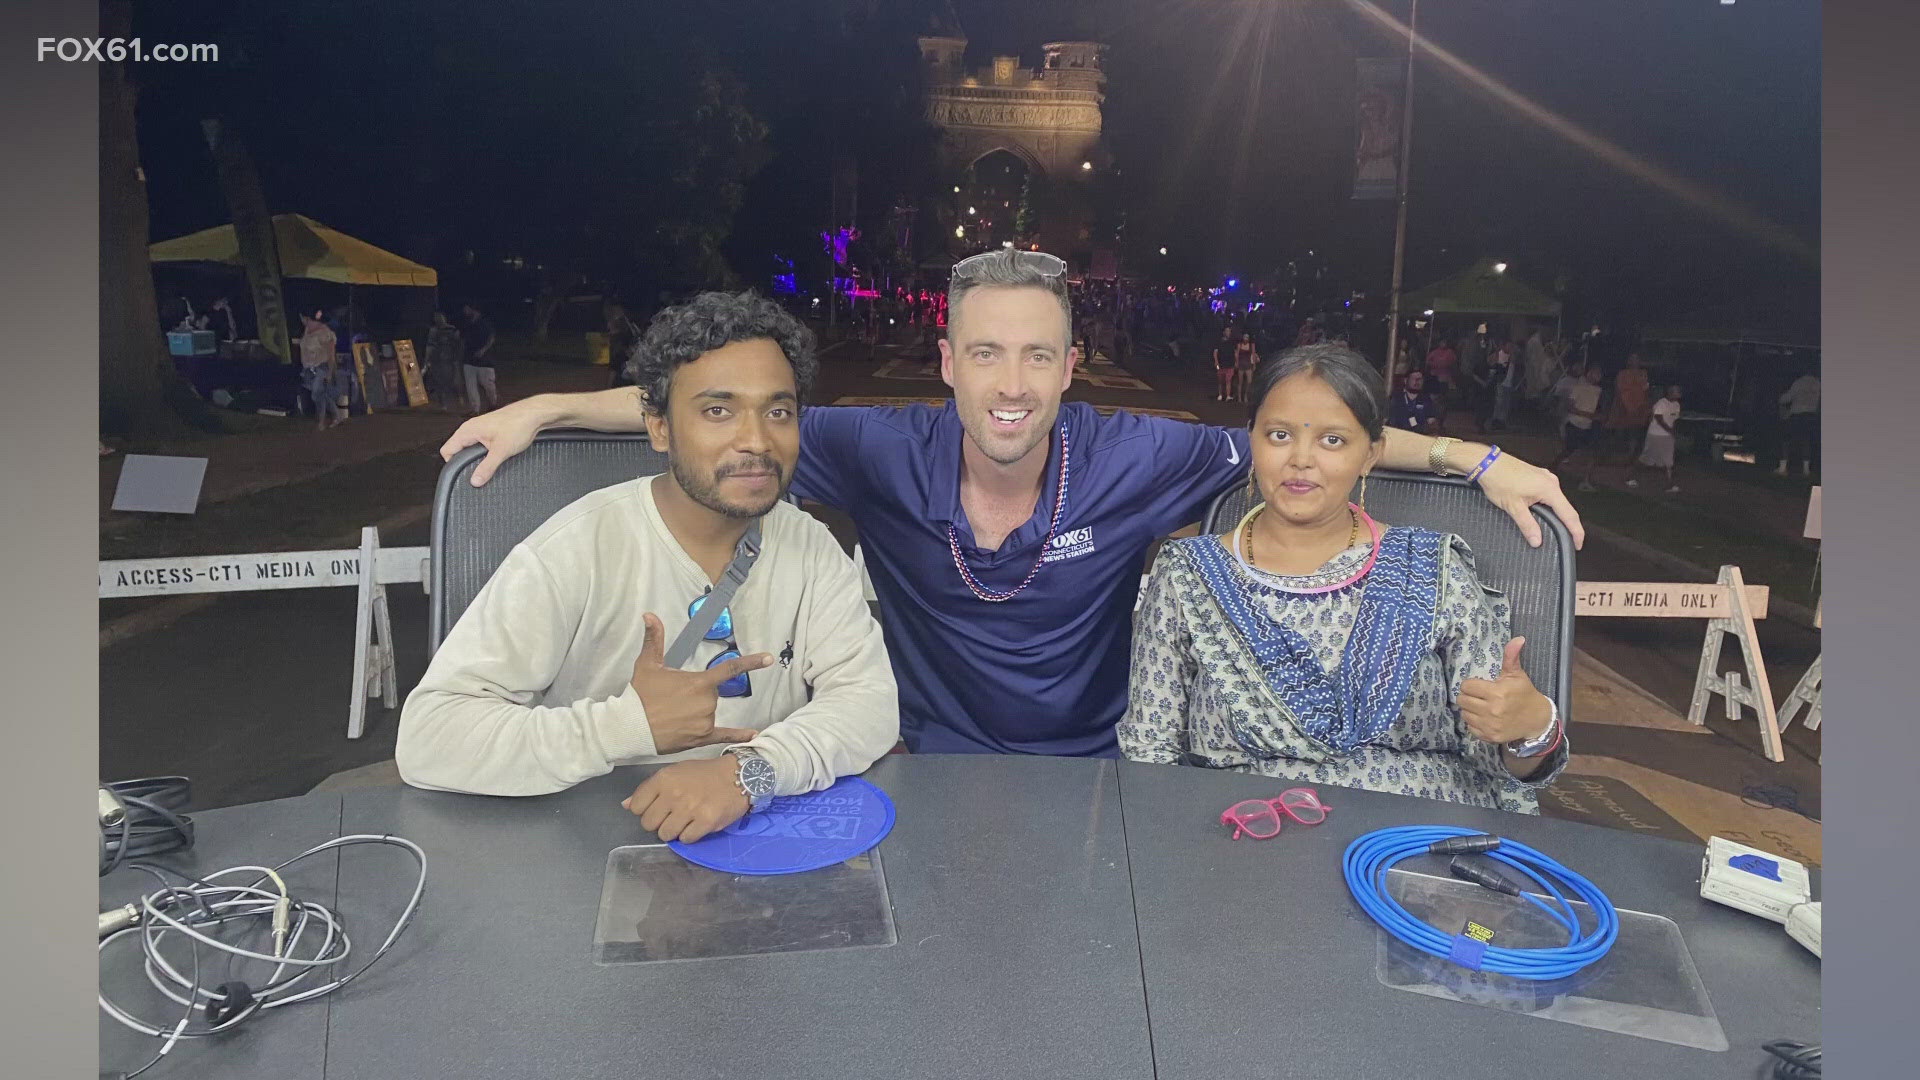 FOX61's Keith McGilvery was the first person Ullas and Pooja Chandrakar met when they first moved to the United States from India earlier this year.